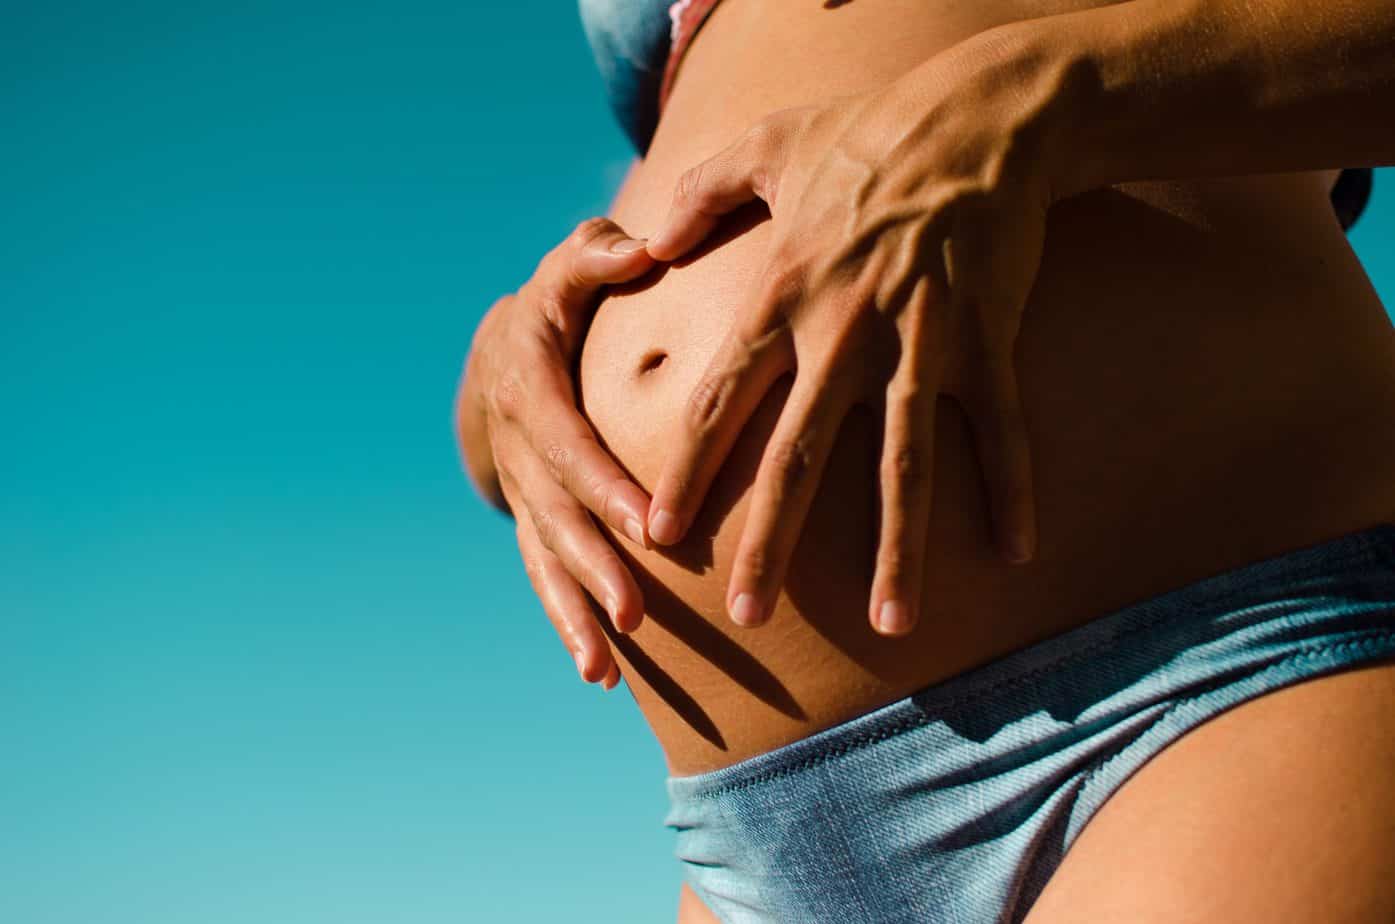 Sacroiliac Joint Pain and Pregnancy